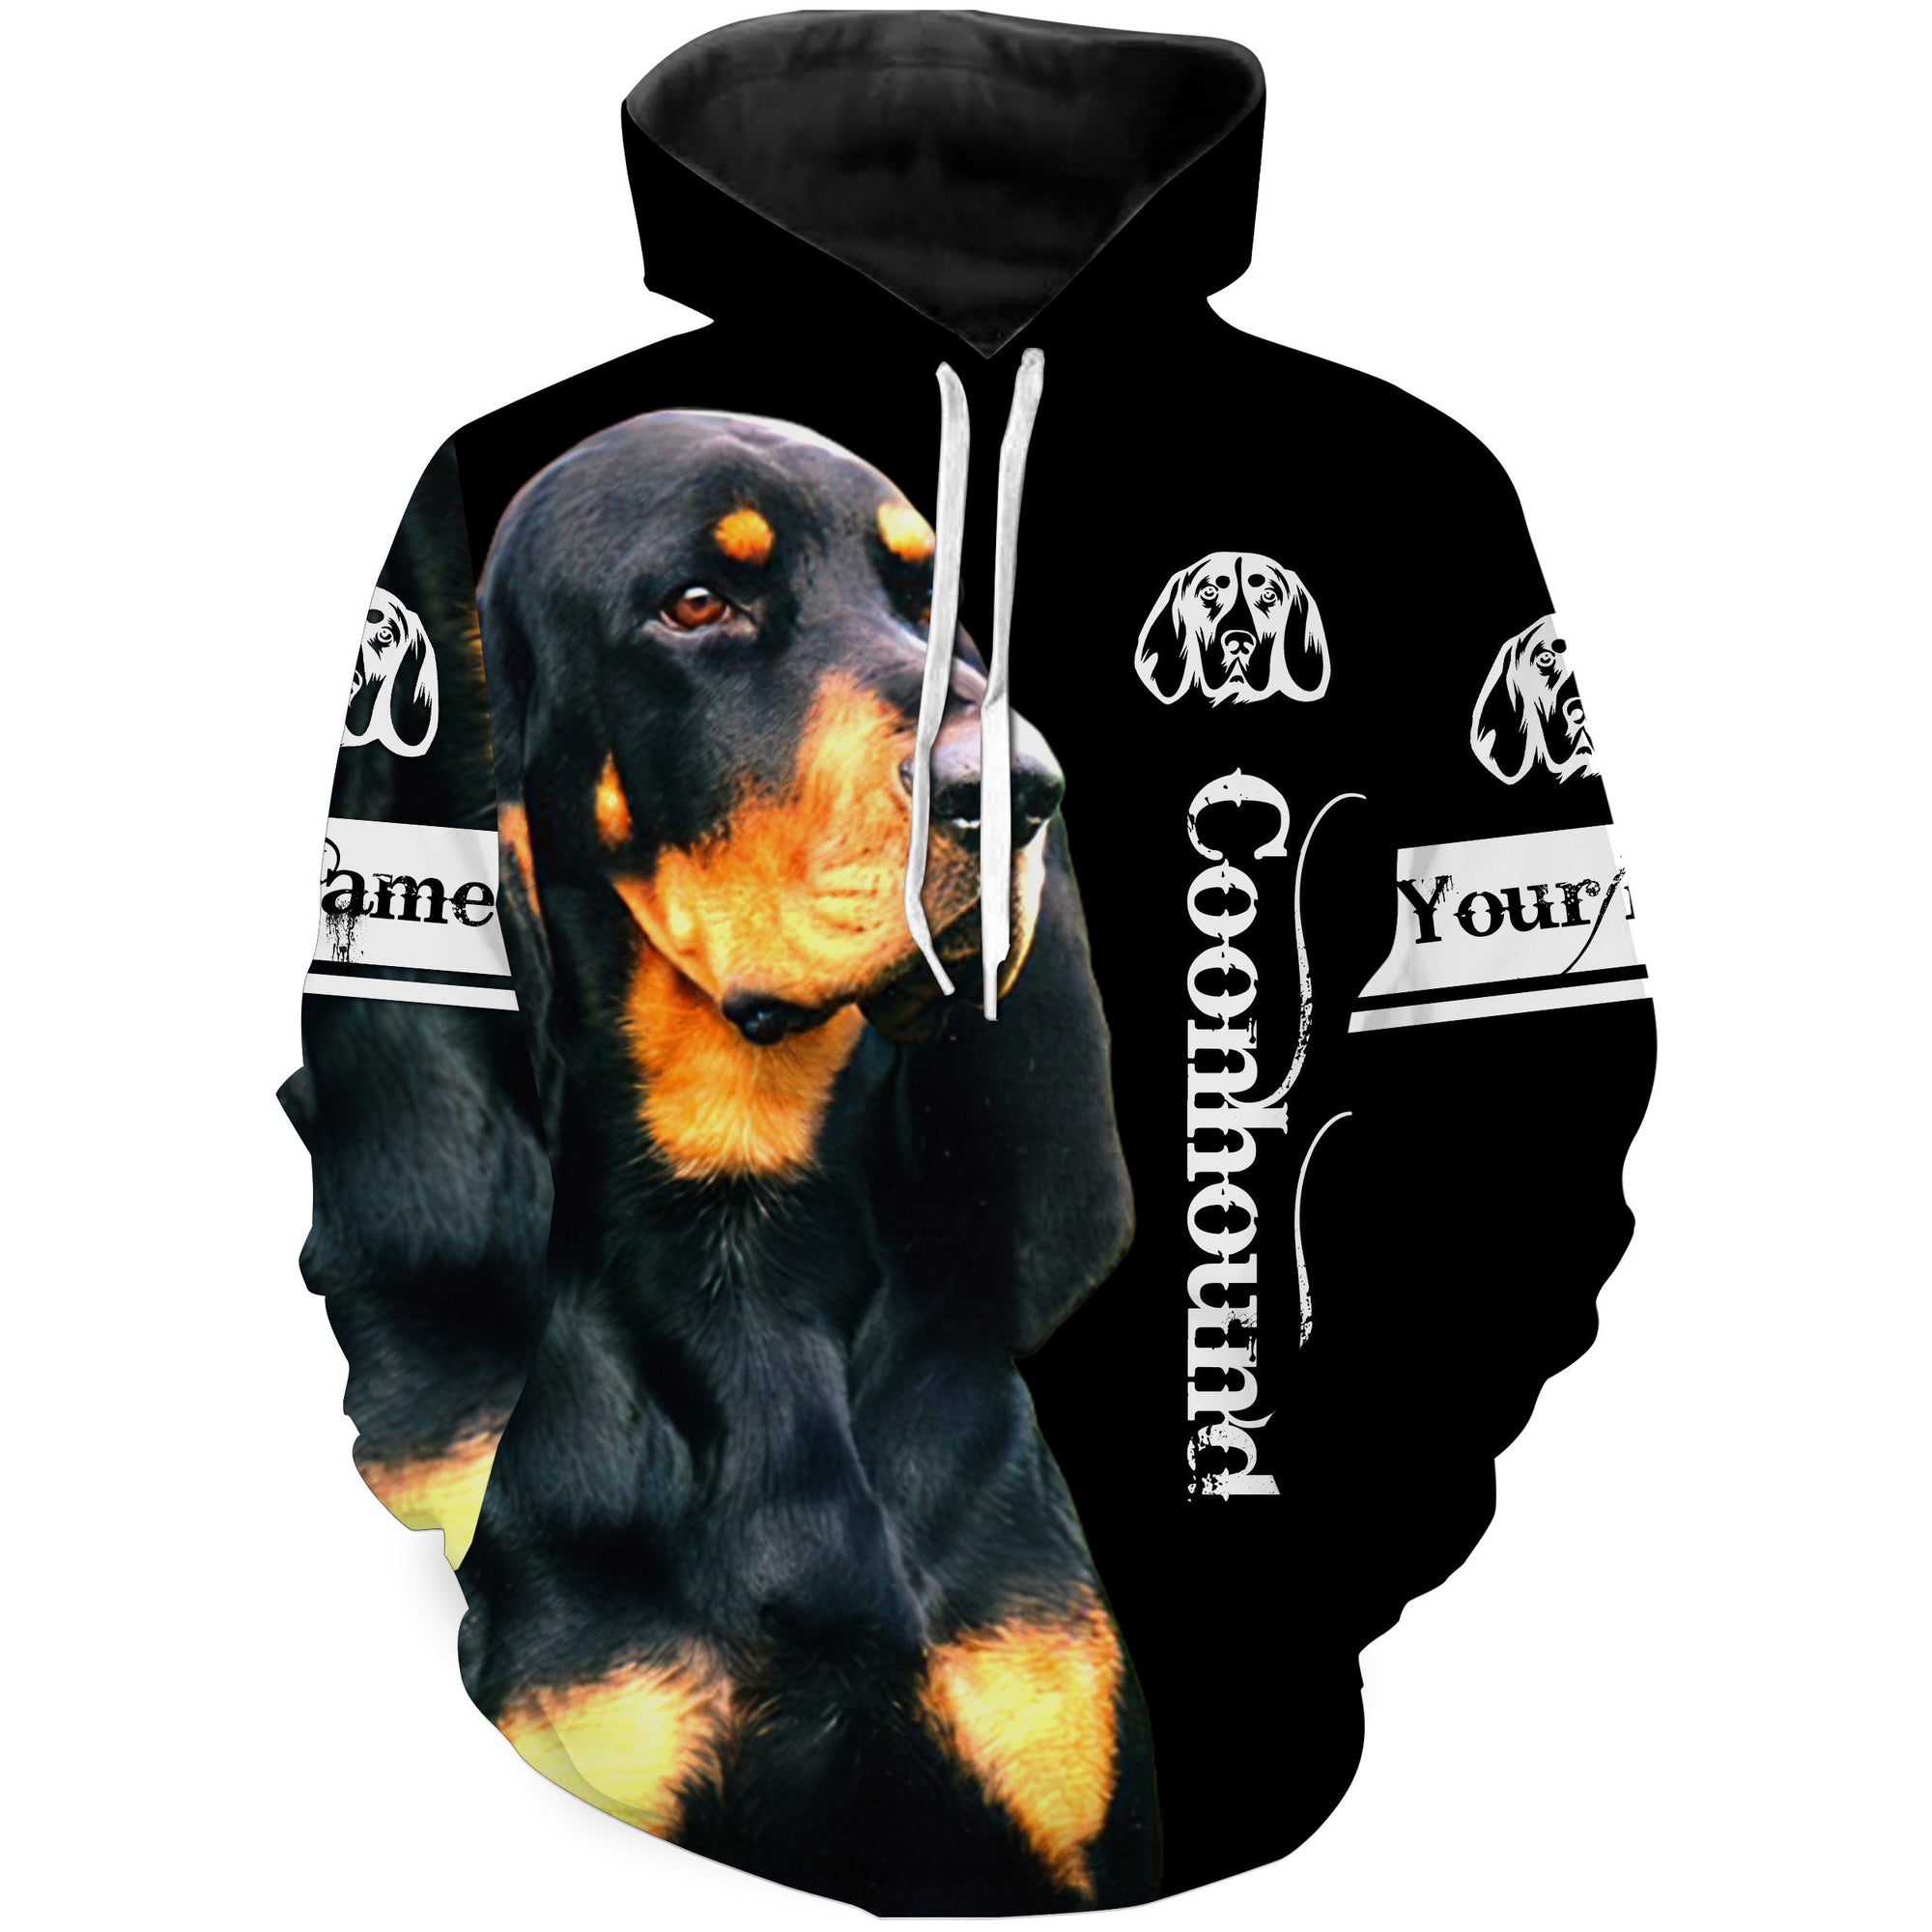 black-and-tan-coonhound-3d-all-over-printed-shirts-hoodie-t-shirt-coonhound-dog-personalized-gifts-for-hound-lovers-fishing-hoodie